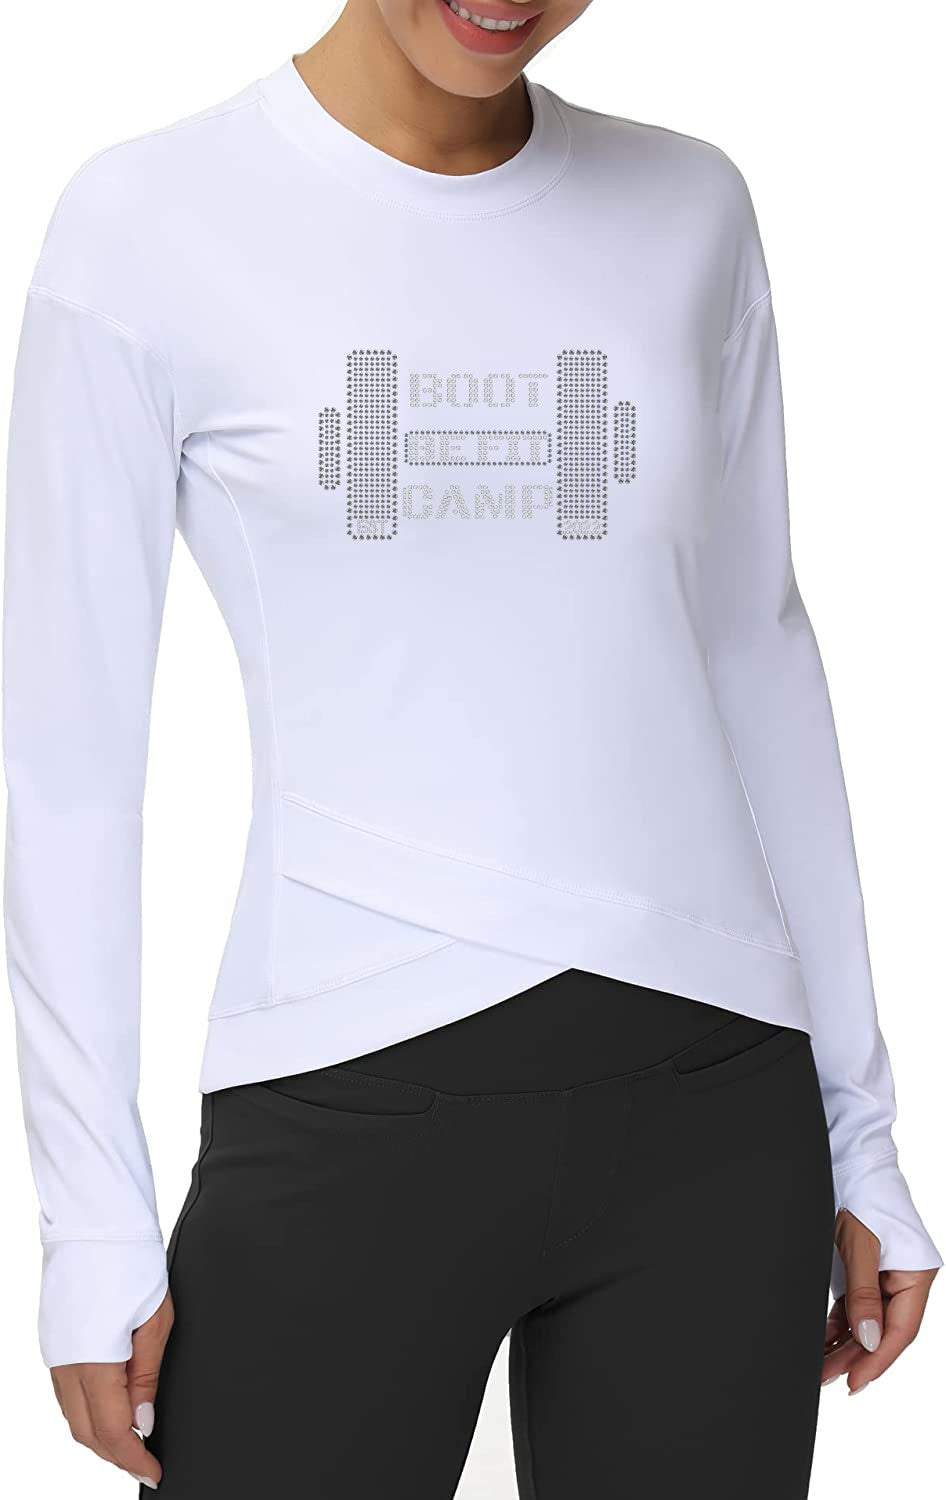 BE FIT BOOTCAMP | FUN FITNESS BLING Women's Compression Long Sleeve Yoga Top